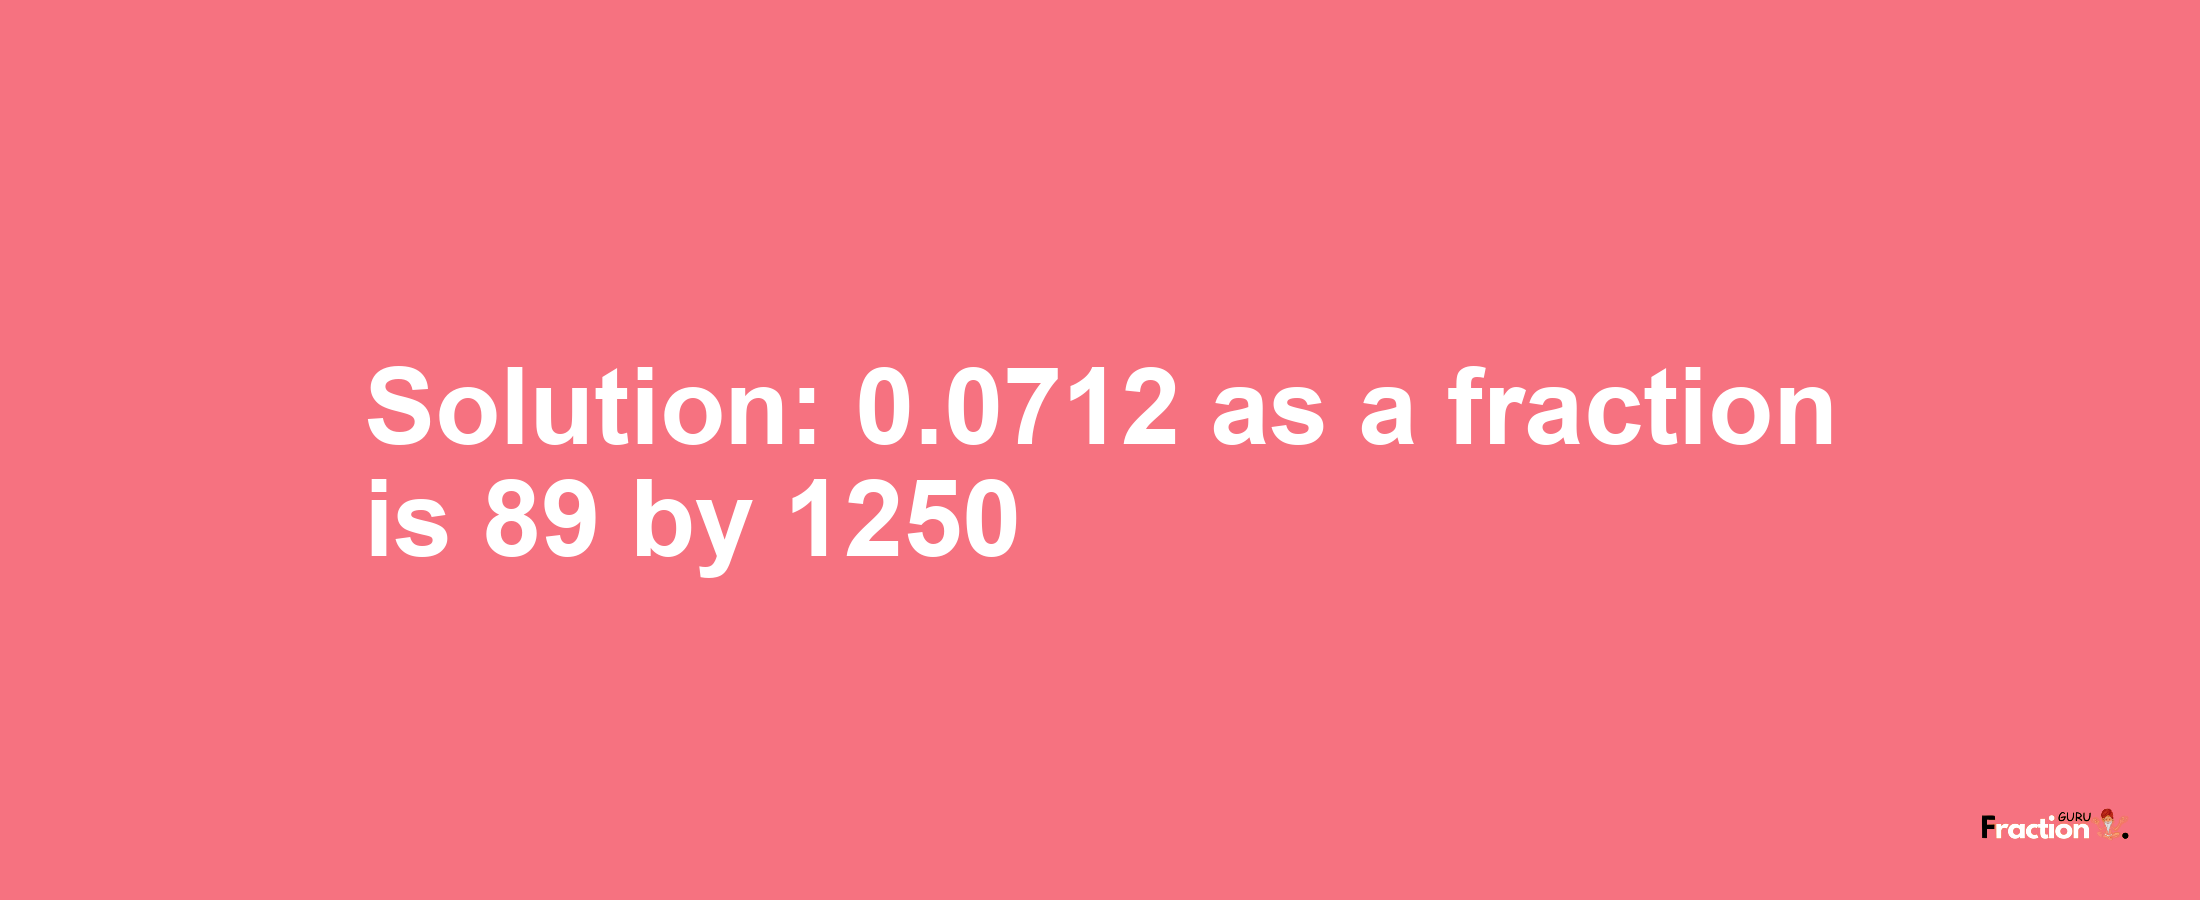 Solution:0.0712 as a fraction is 89/1250